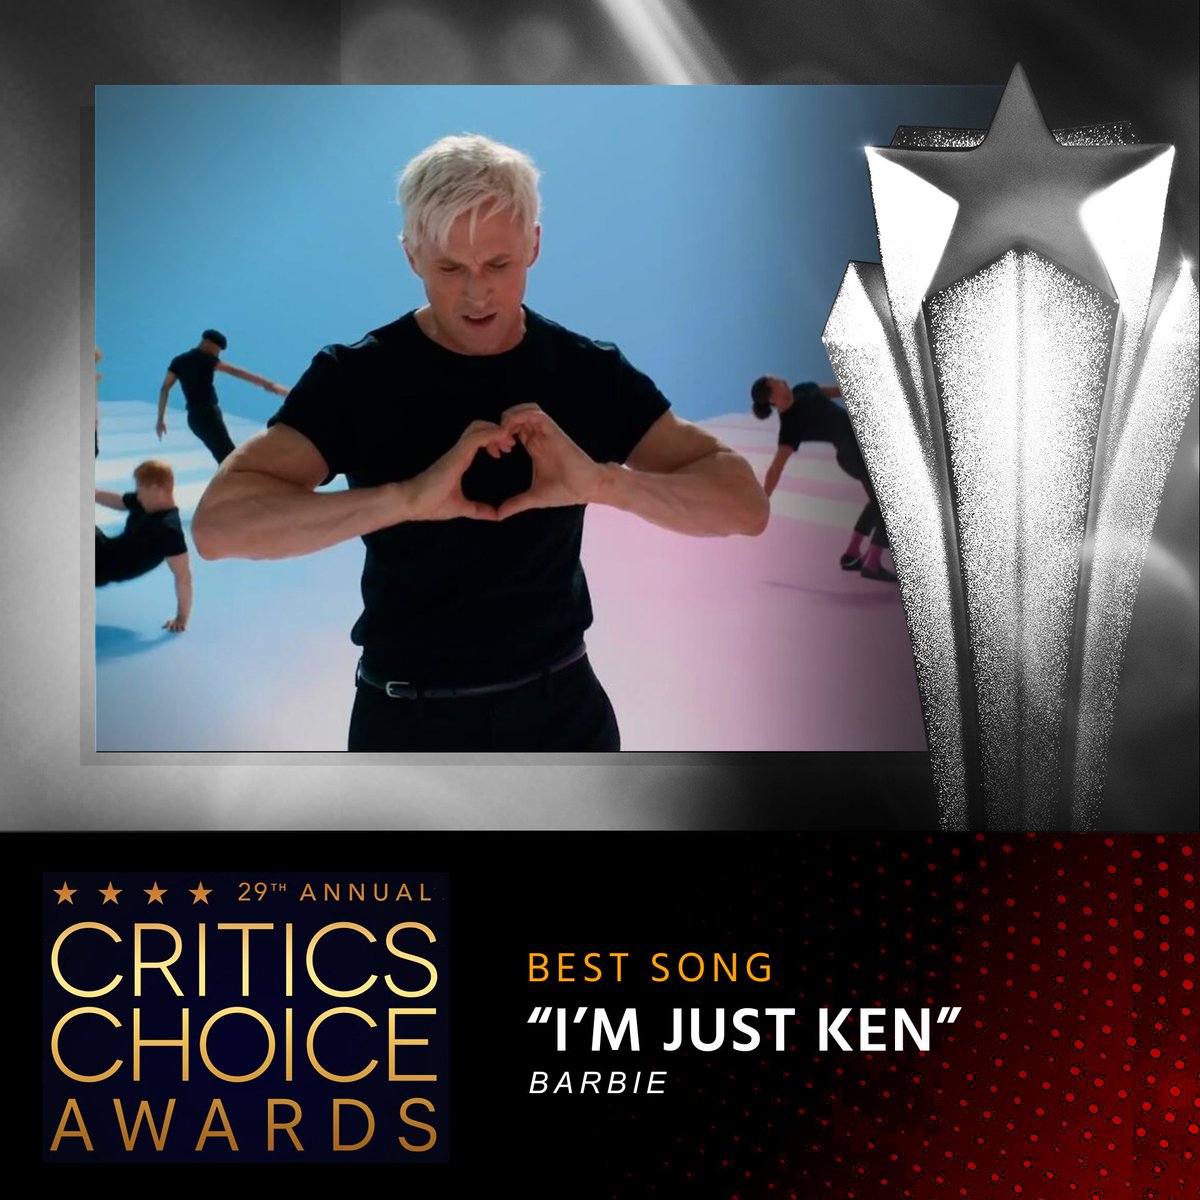 Congratulations to “Barbie,” winner of the #CriticsChoice Award for BEST SONG for “I’m Just Ken”⭐️